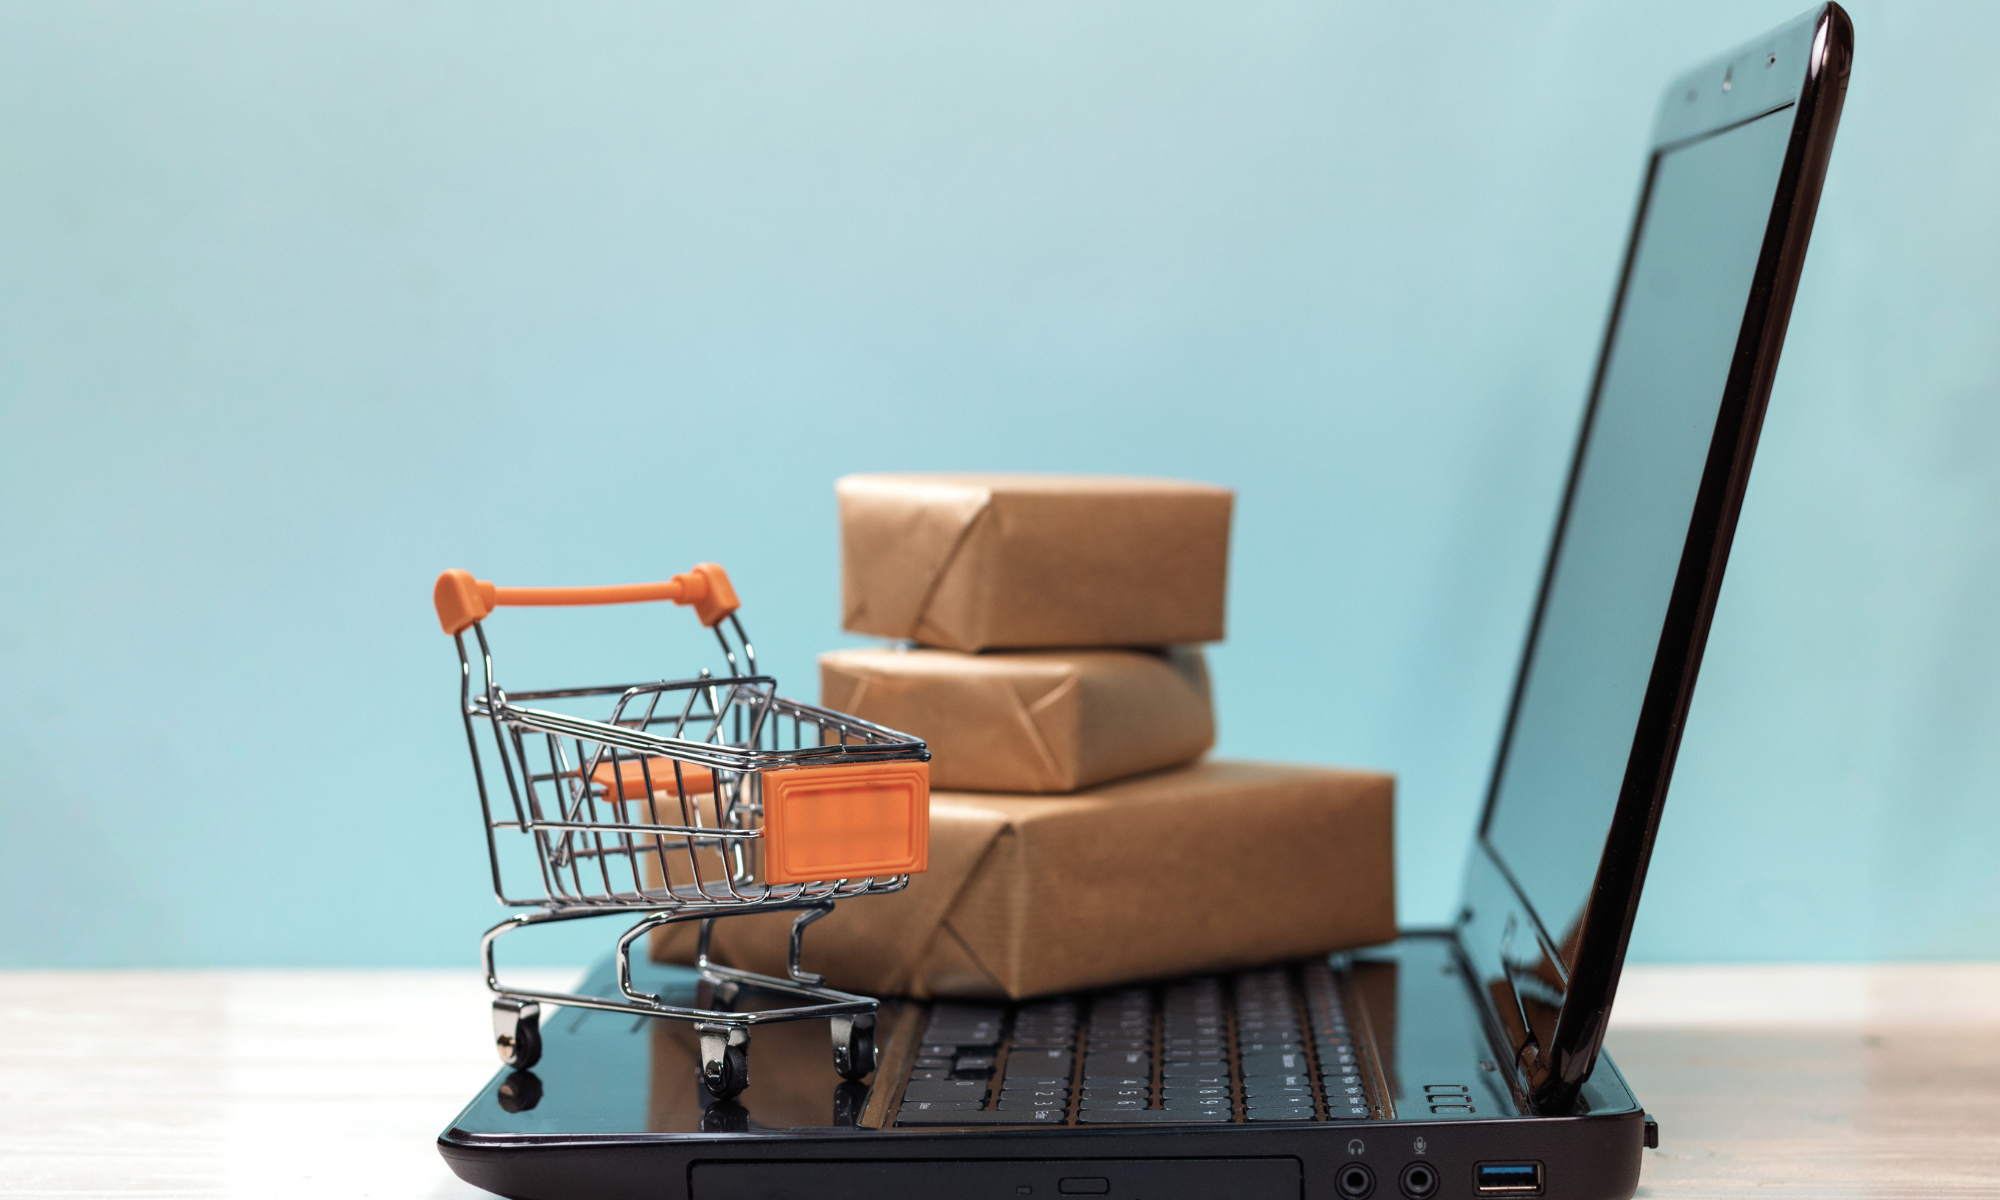 A tiny shopping cart and a package arranged on a laptop keyboard